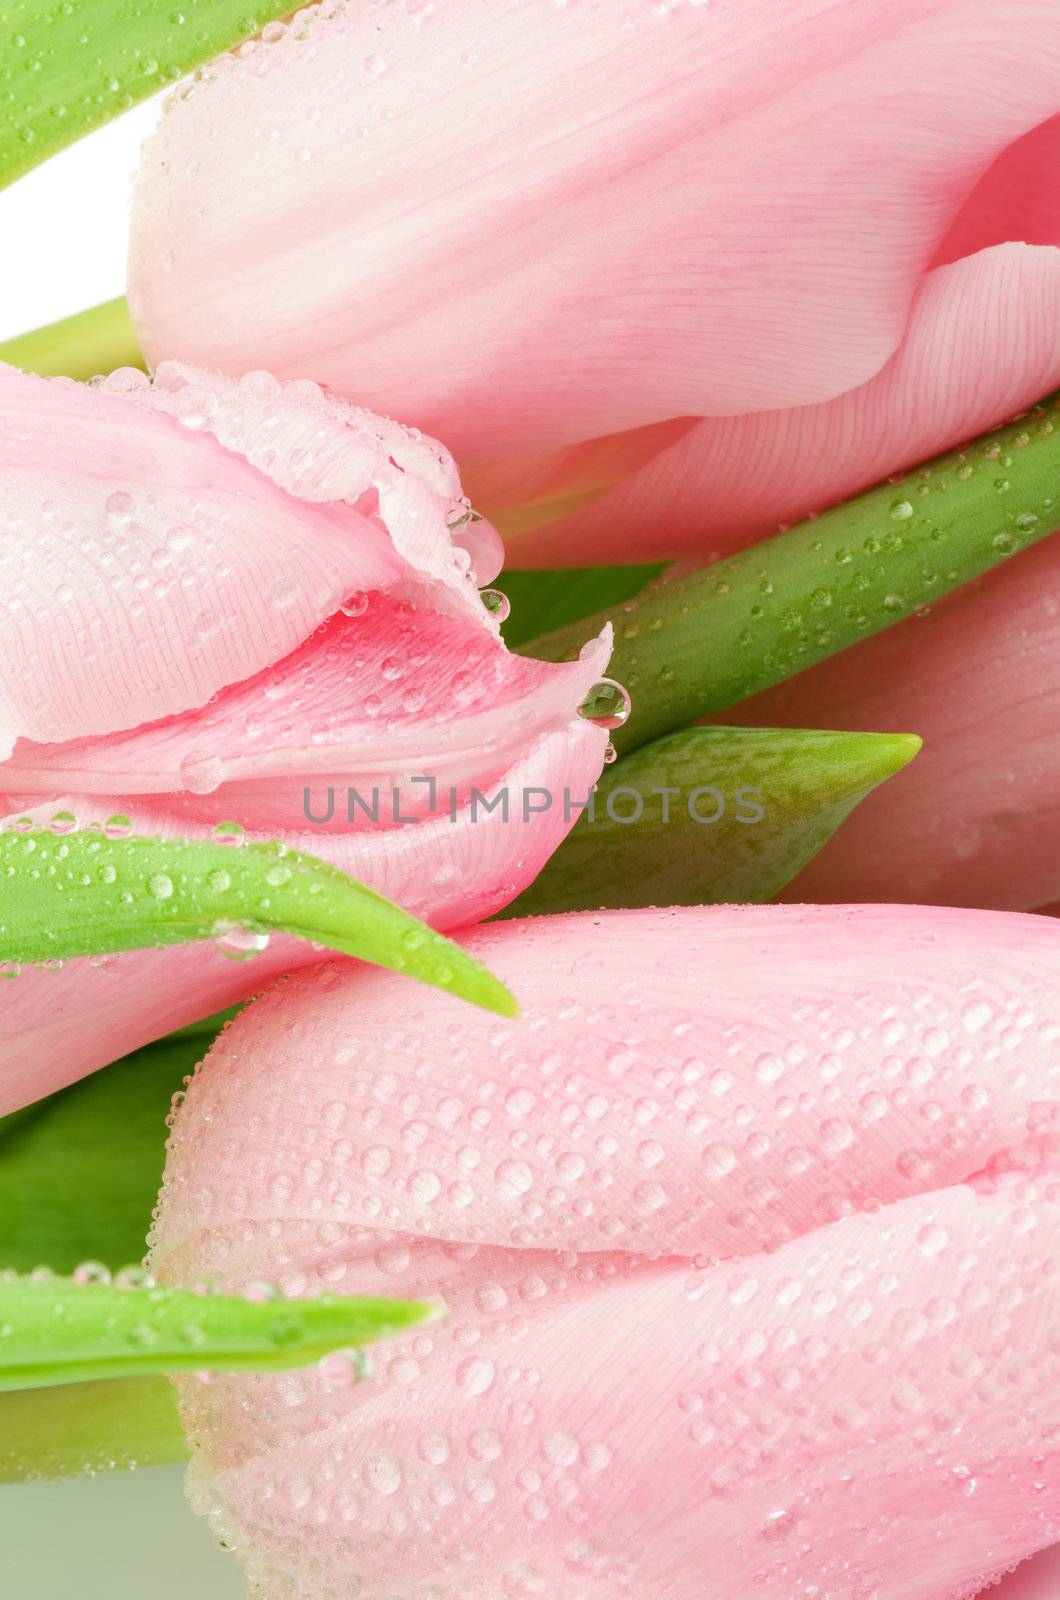 Background of Spring Pink Tulips with Droplets closeup